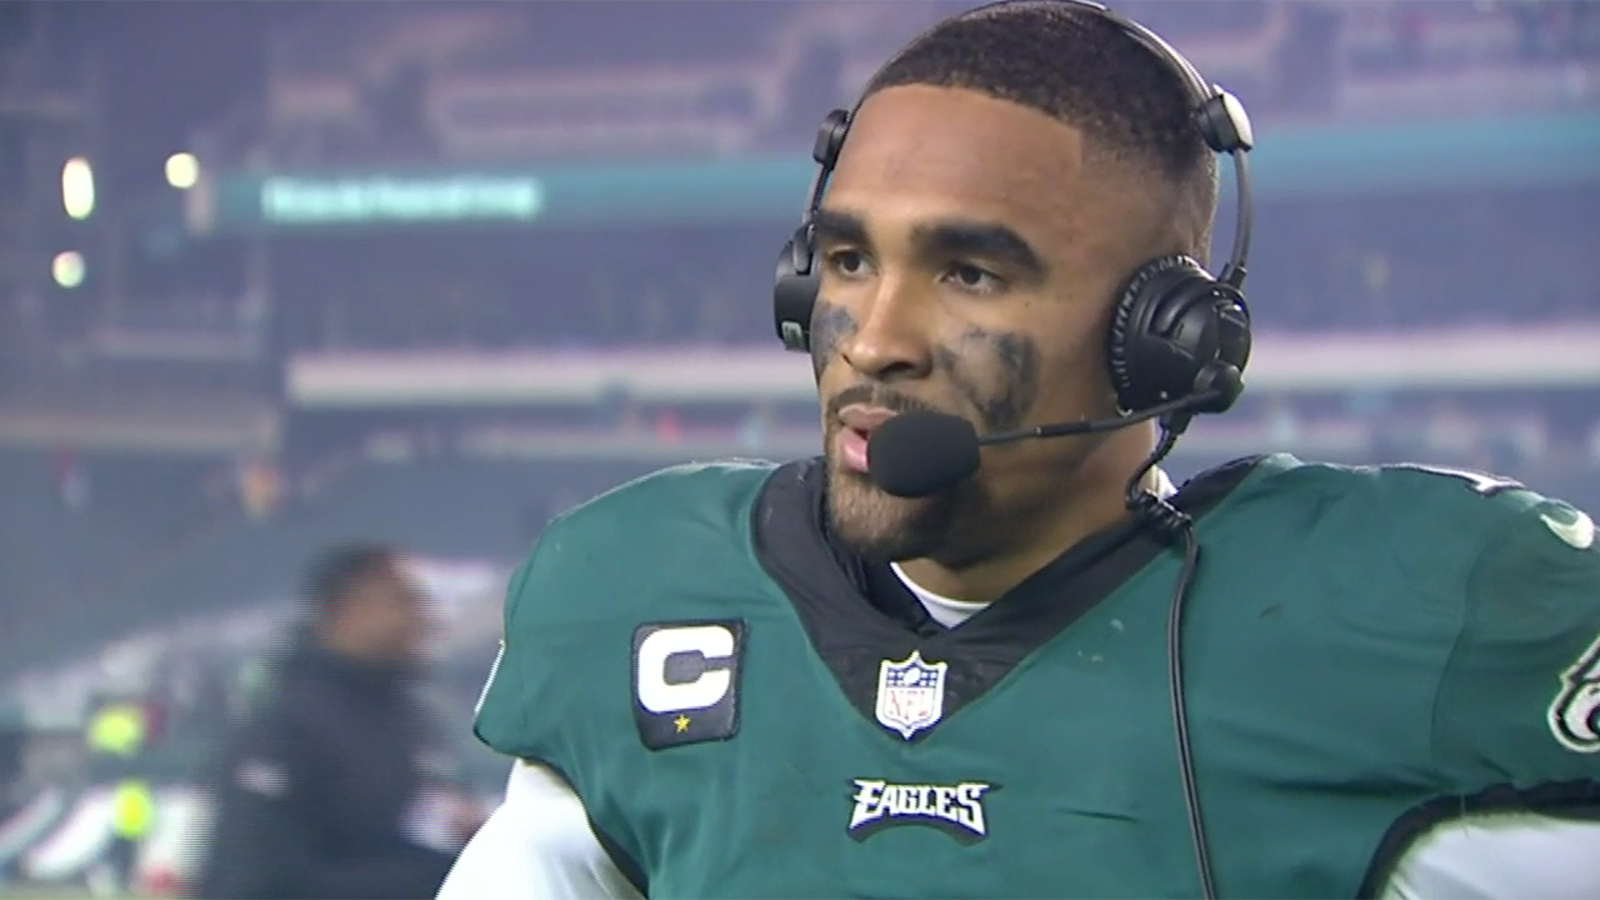 "I'm so proud of this team" — Jalen Hurts on Eagles' win